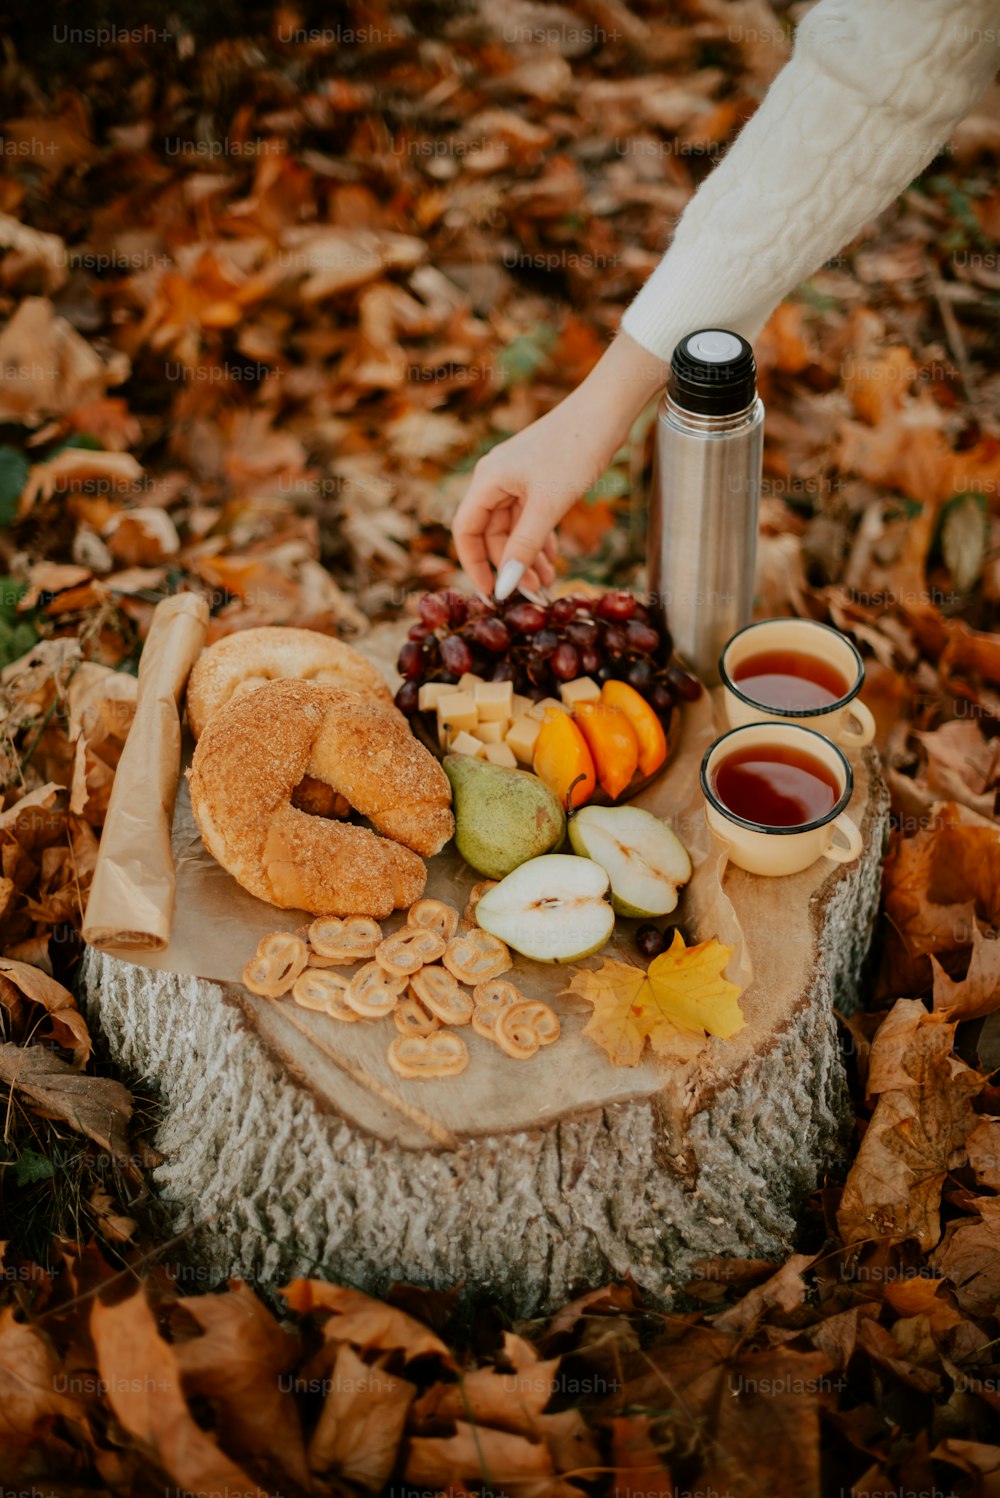 a table topped with donuts, apples, and other foods